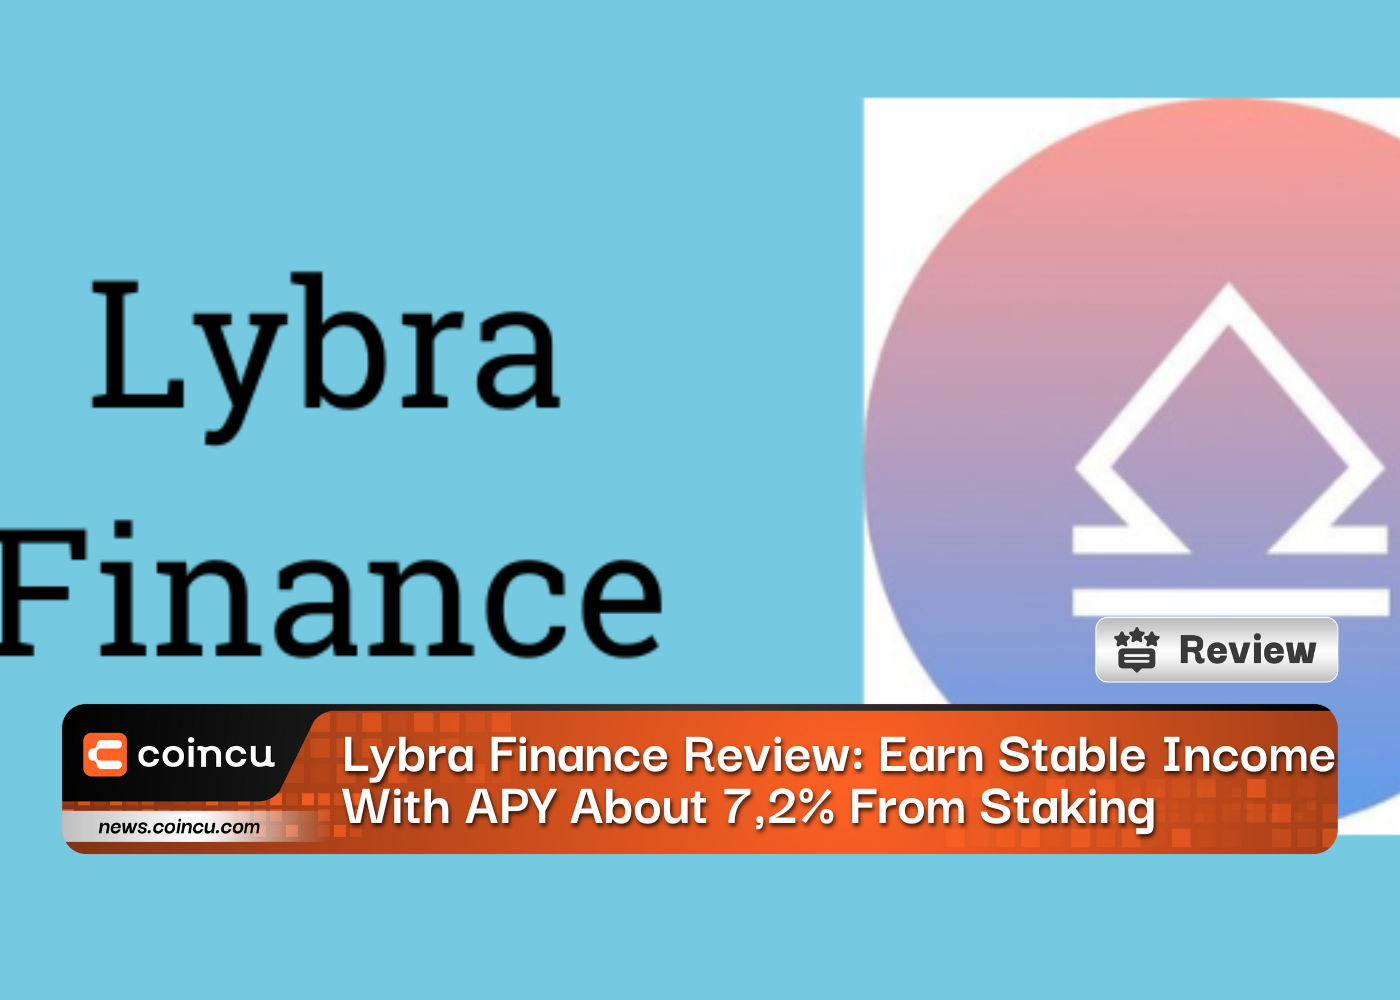 Lybra Finance Review: Earn Stable Income With APY About 7,2% From Staking